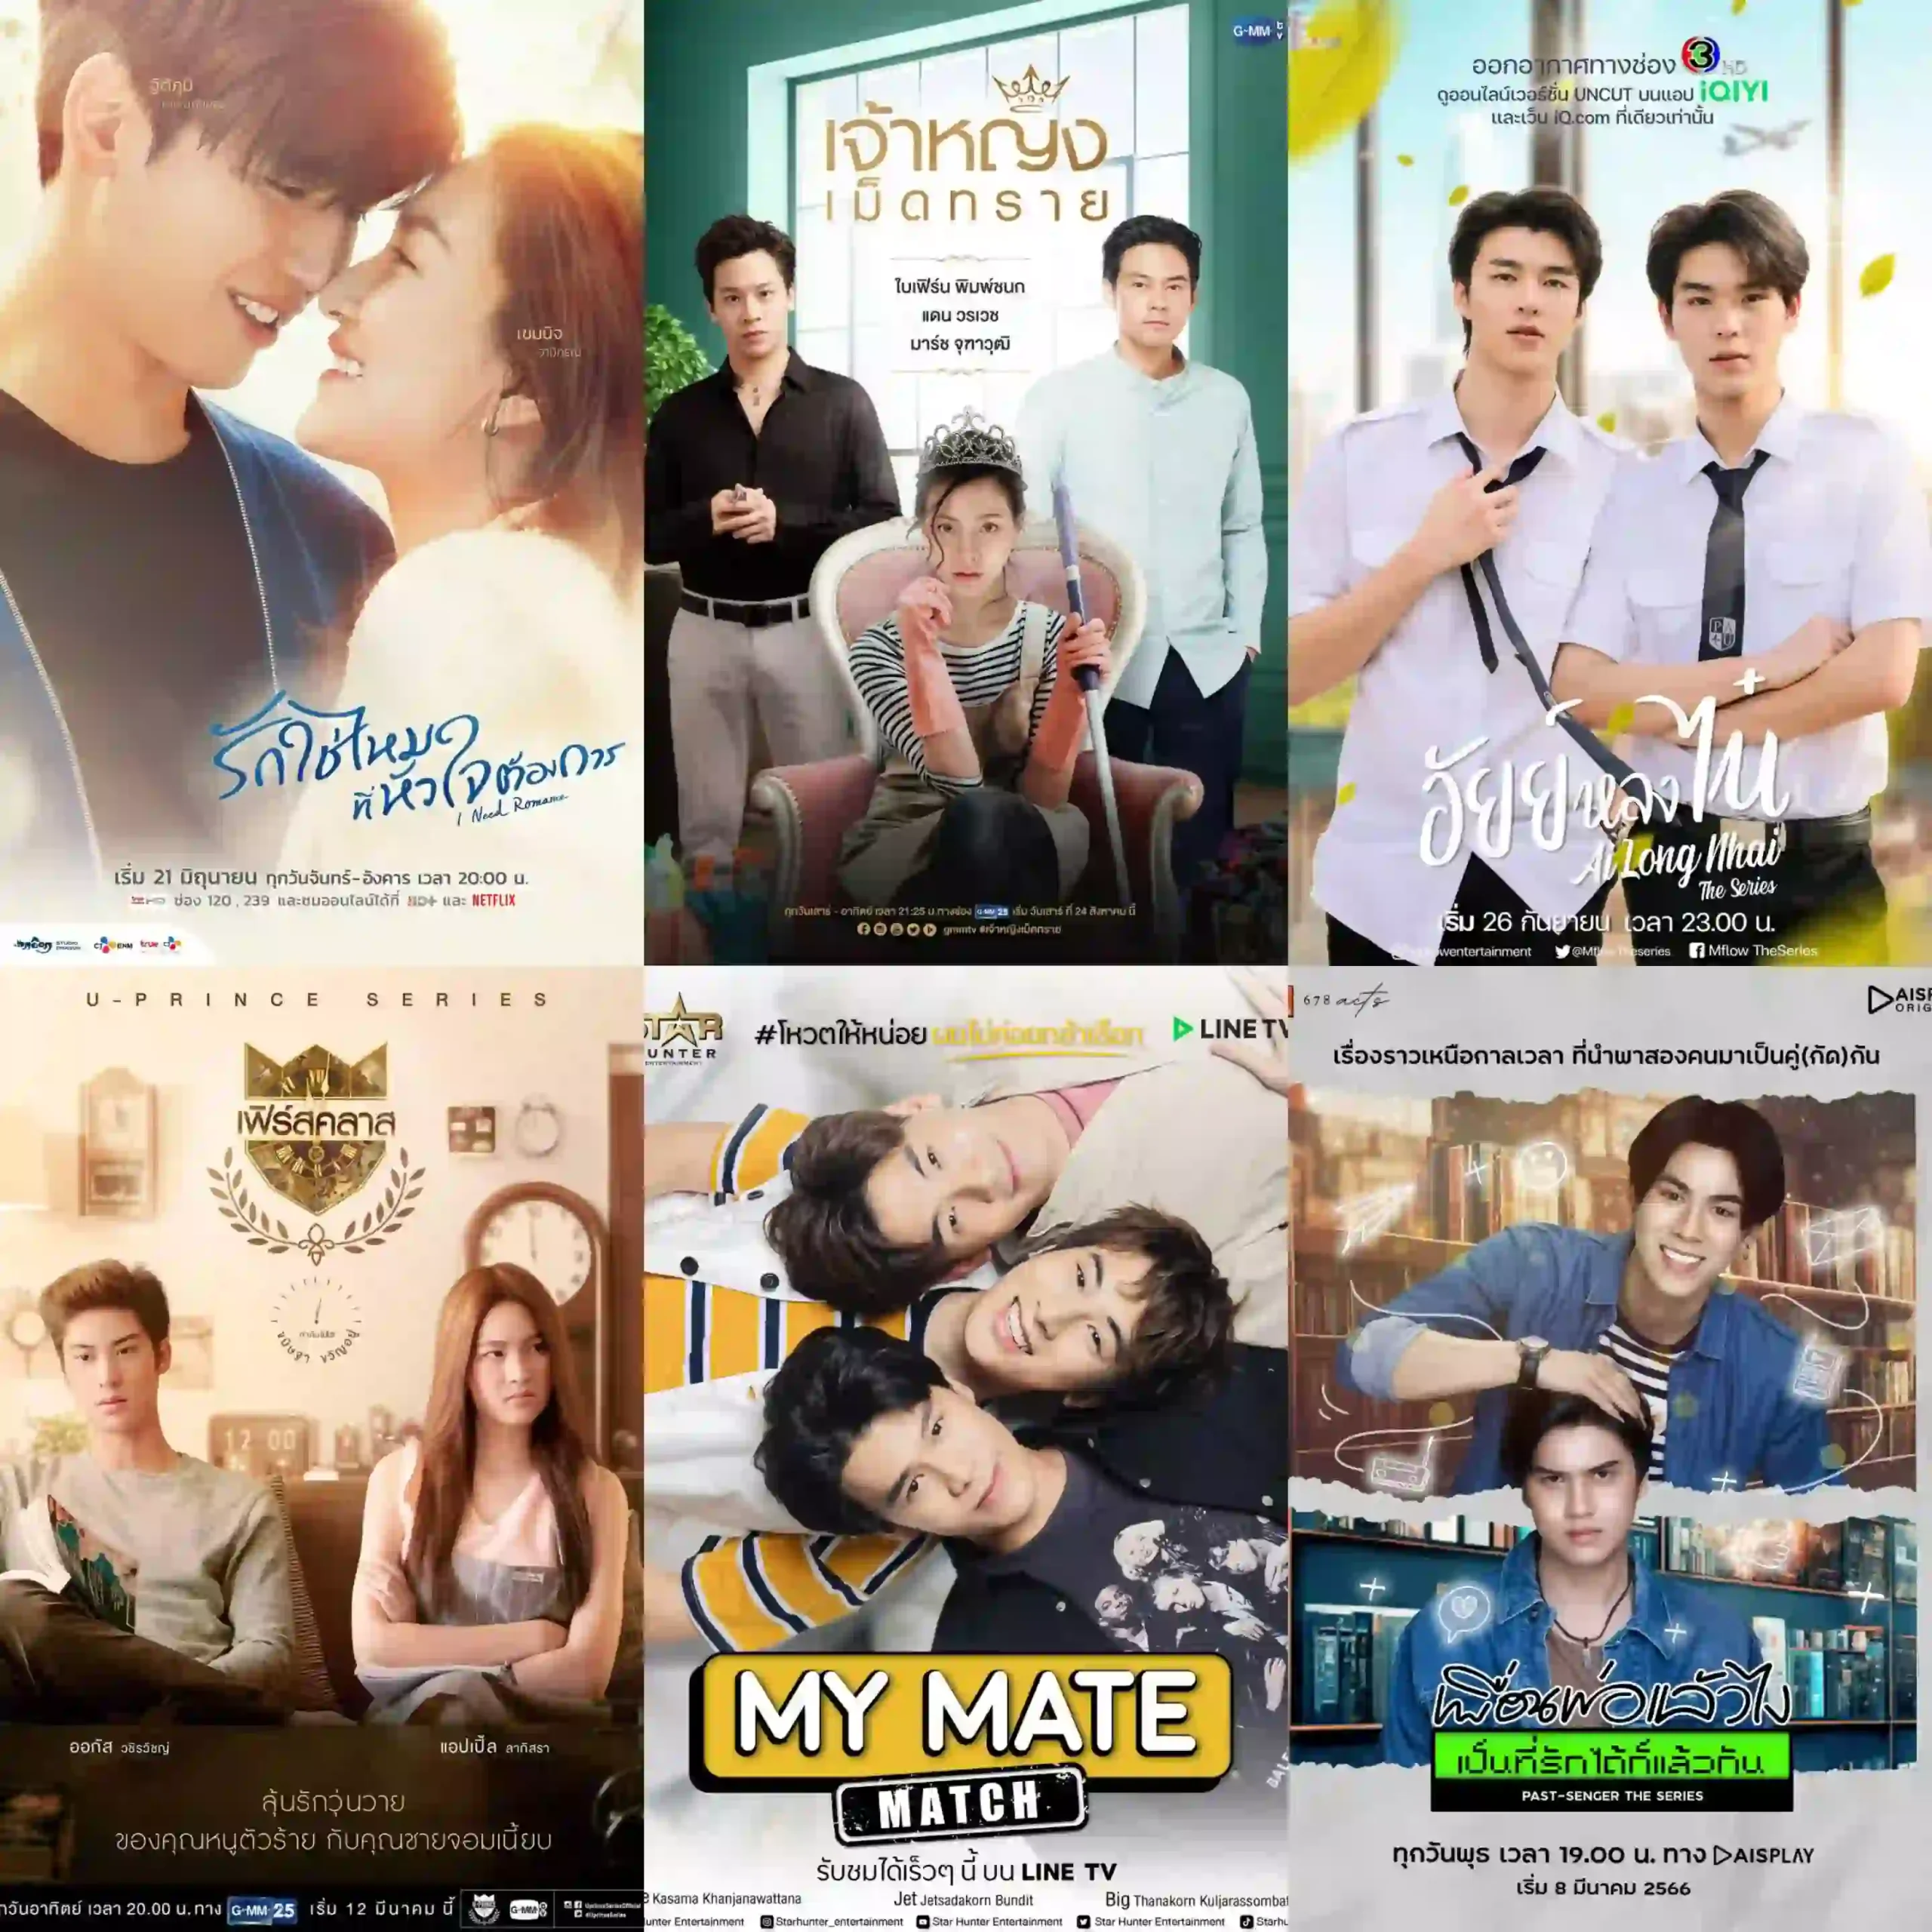 Romantic Thai drama about living together cohabitation to watch